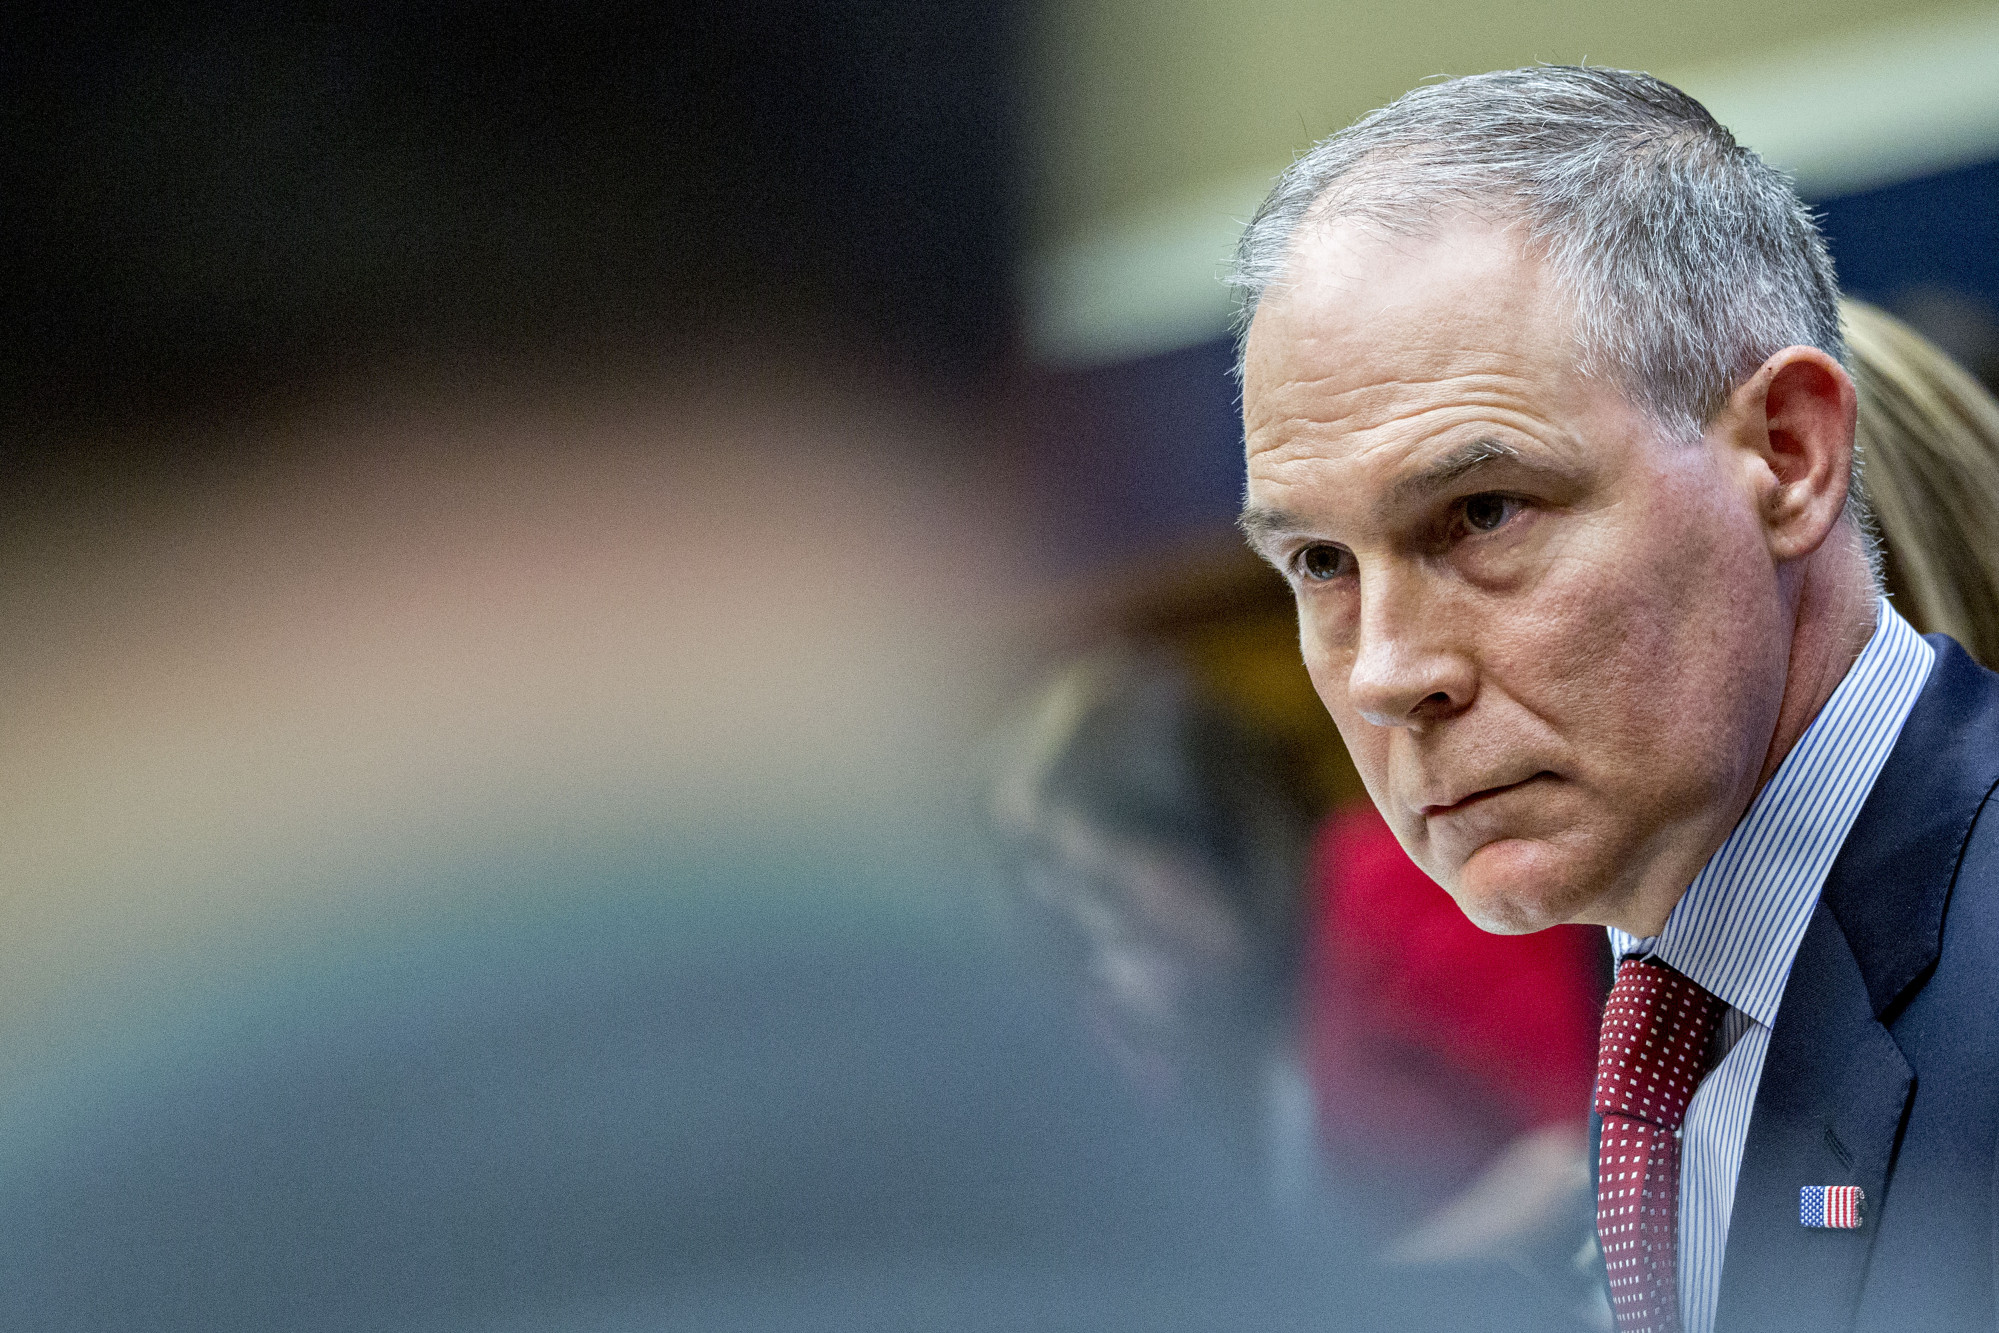 Scott Pruitt&nbsp;listens during a House Energy and Commerce Subcommittee hearing in Washington, D.C.&nbsp;on&nbsp;April 26, 2018.